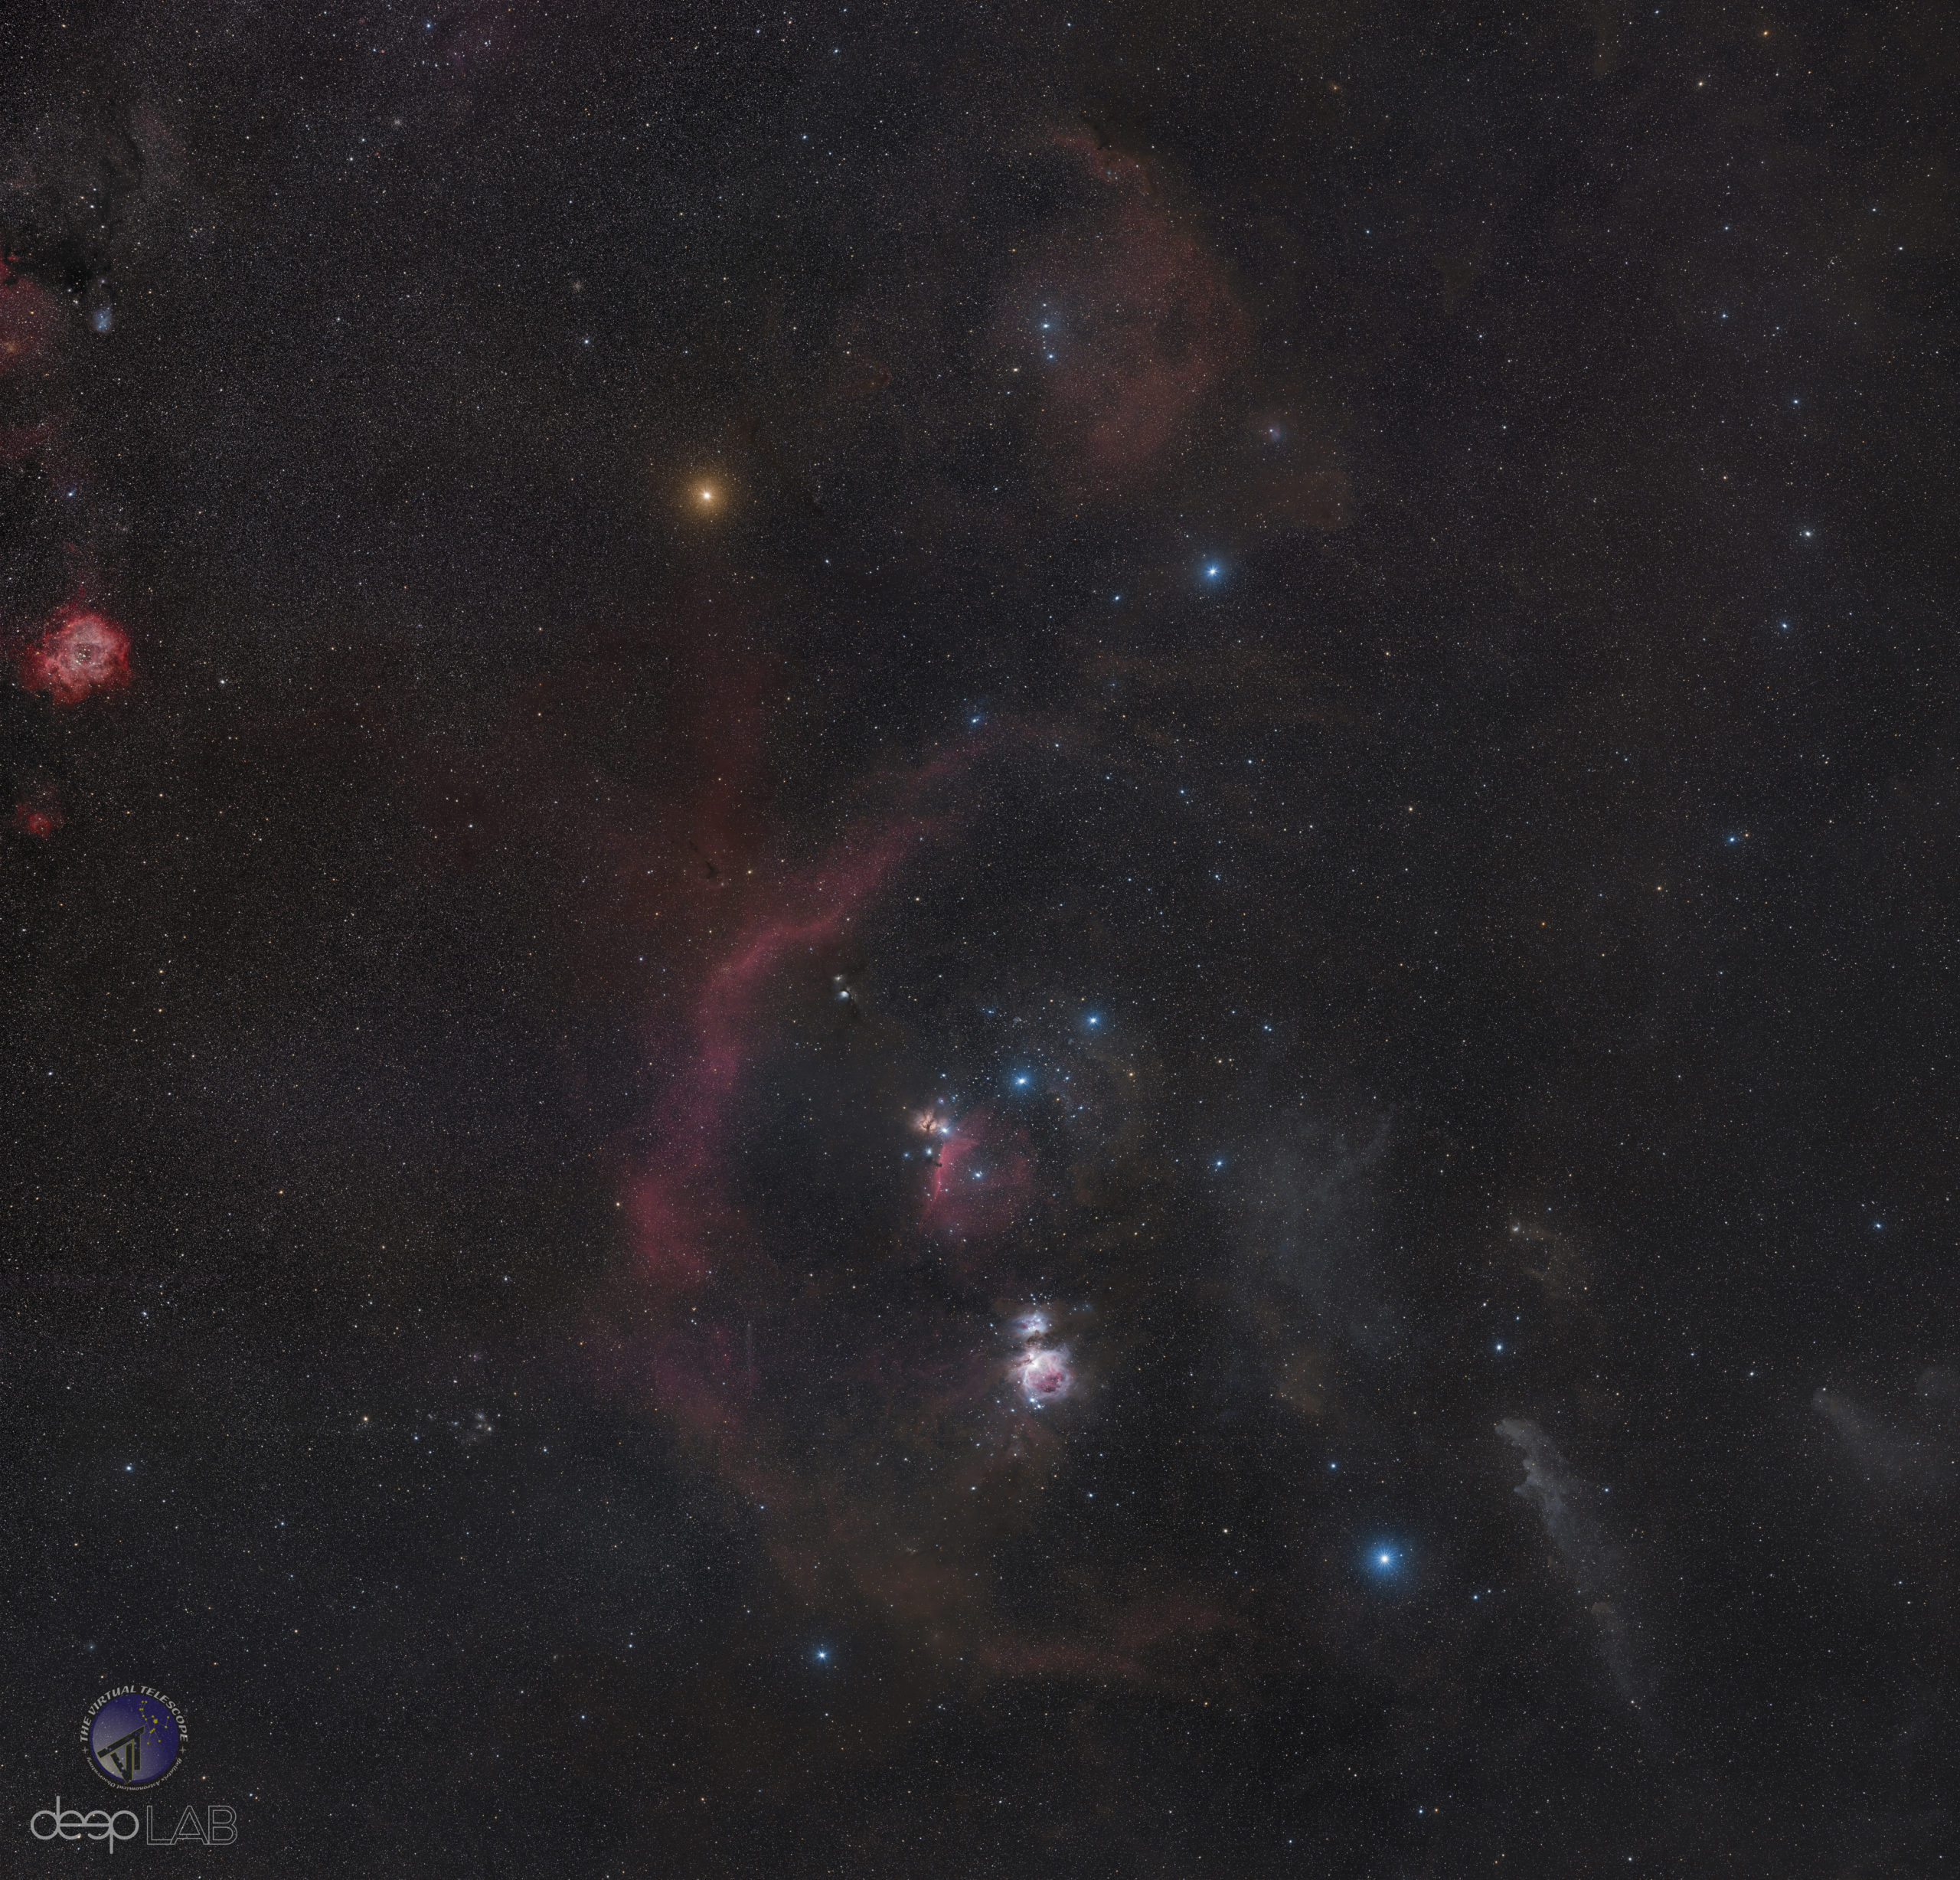 The Orion constellation and its gems: click on the image for high resolution.